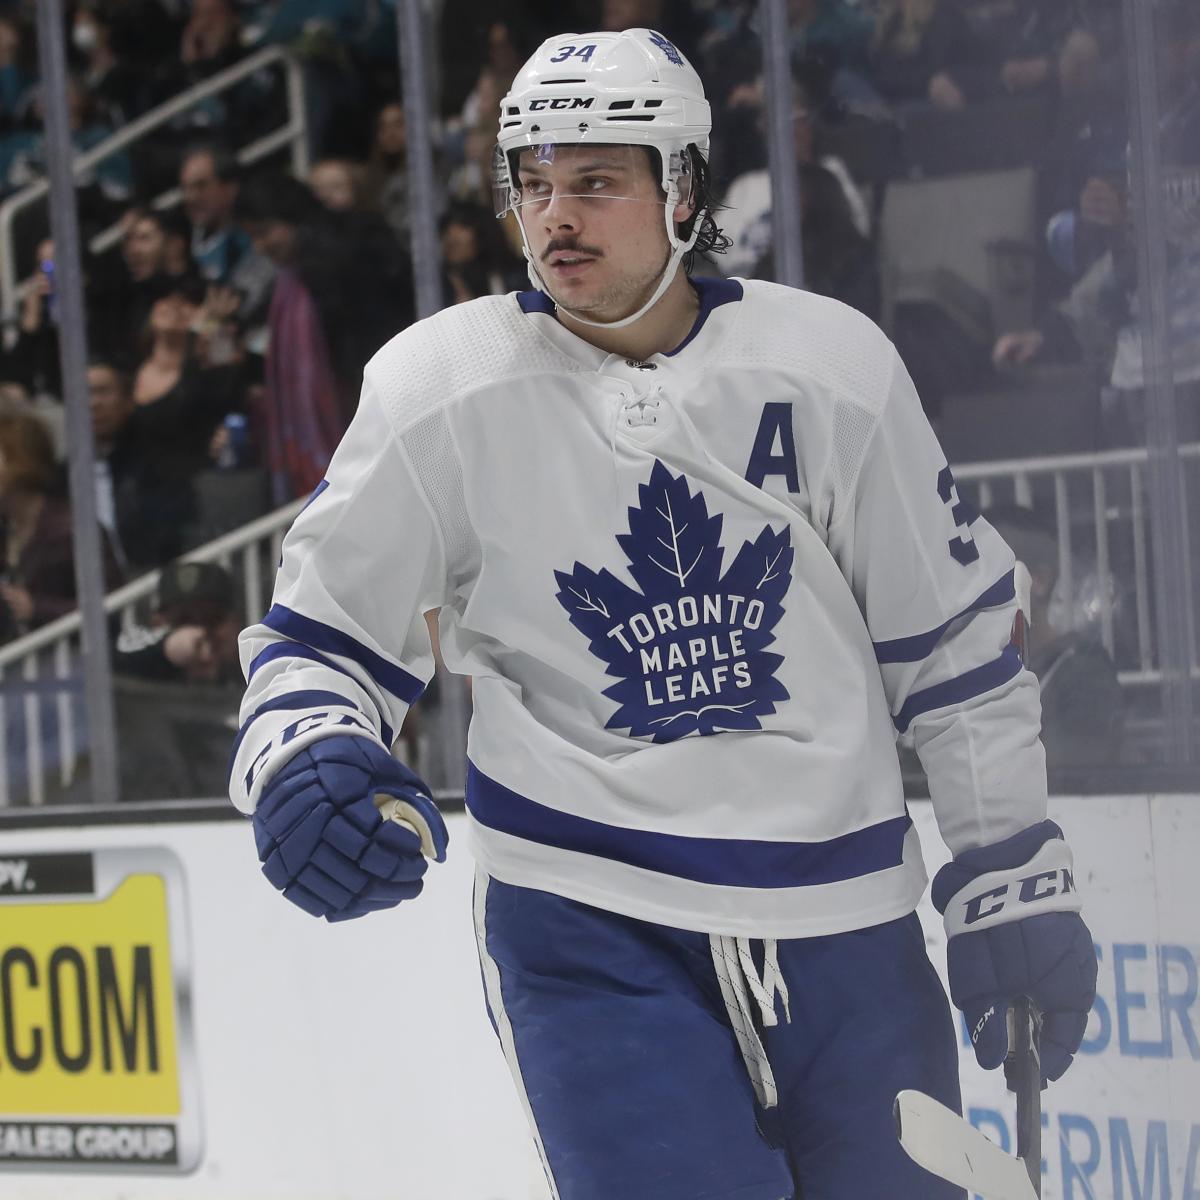 Steve Simmons once revealed Auston Matthews' COVID-19 diagnosis publicly  which vexed $53,000,000 Maple Leafs star